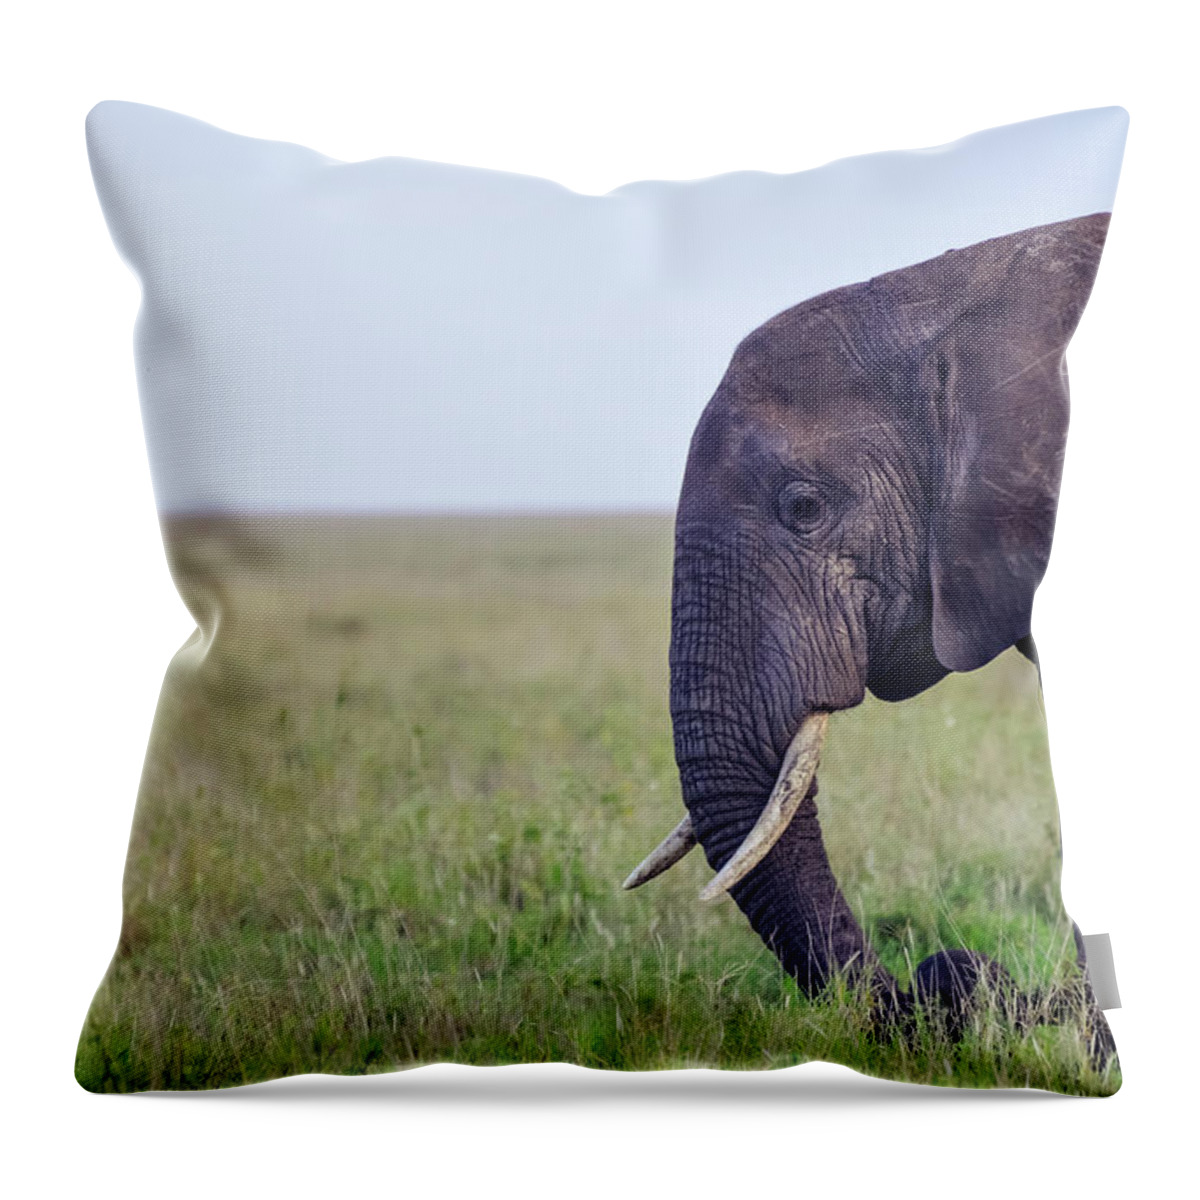 Grass Throw Pillow featuring the photograph Wild Elephant Face In Serengeti Plains by Volanthevist